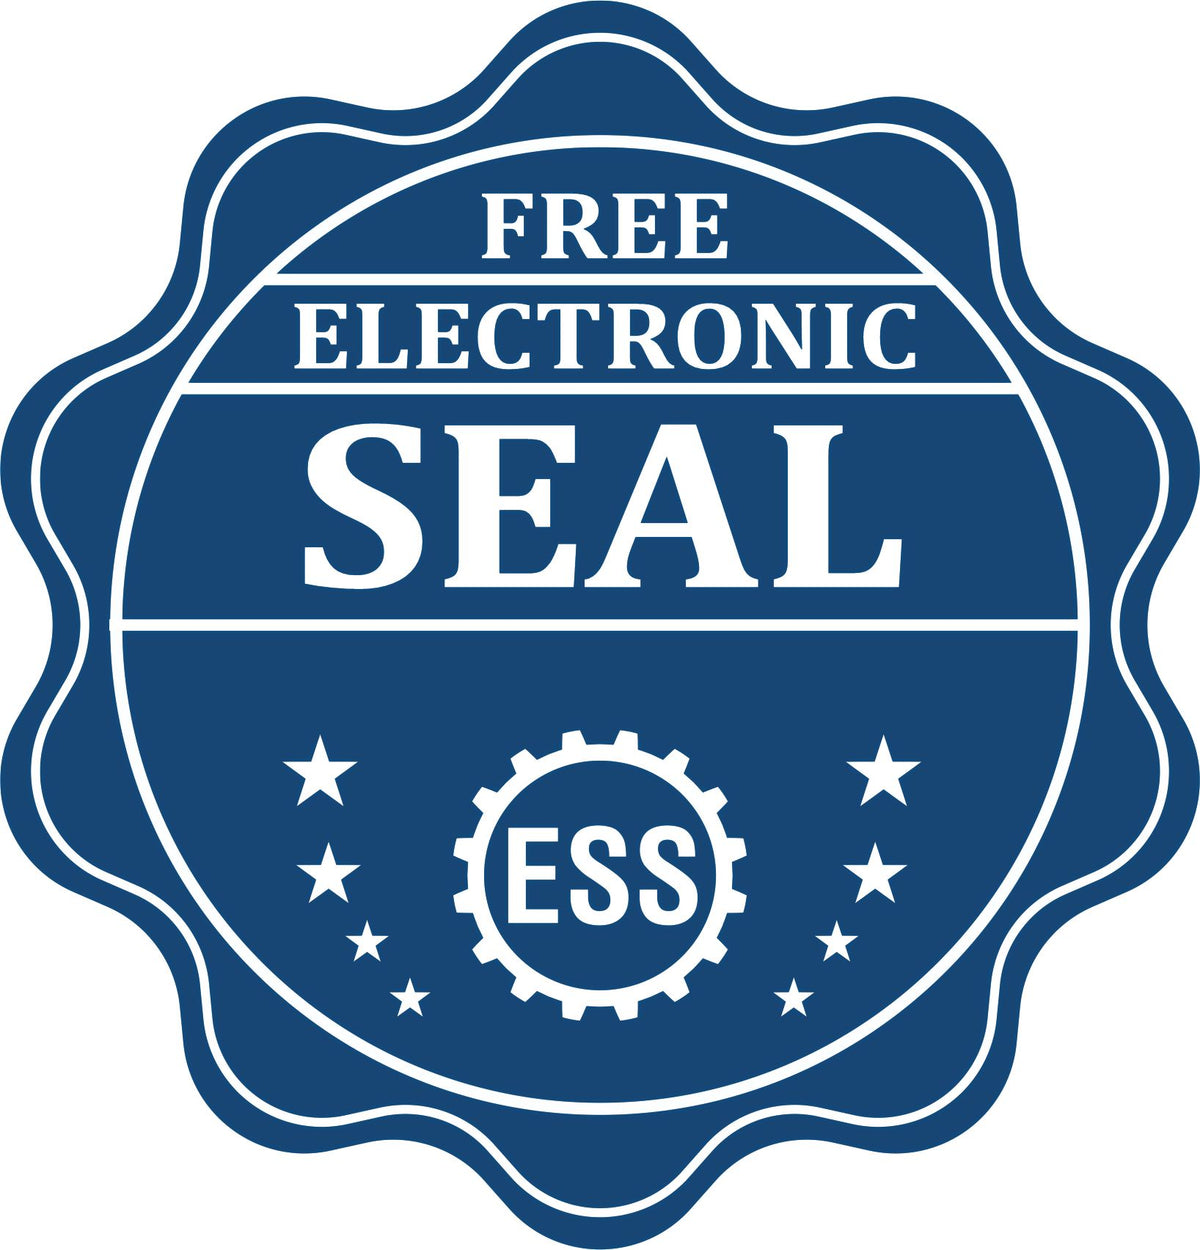 A badge showing a free electronic seal for the Hybrid Mississippi Engineer Seal with stars and the ESS gear on the emblem.